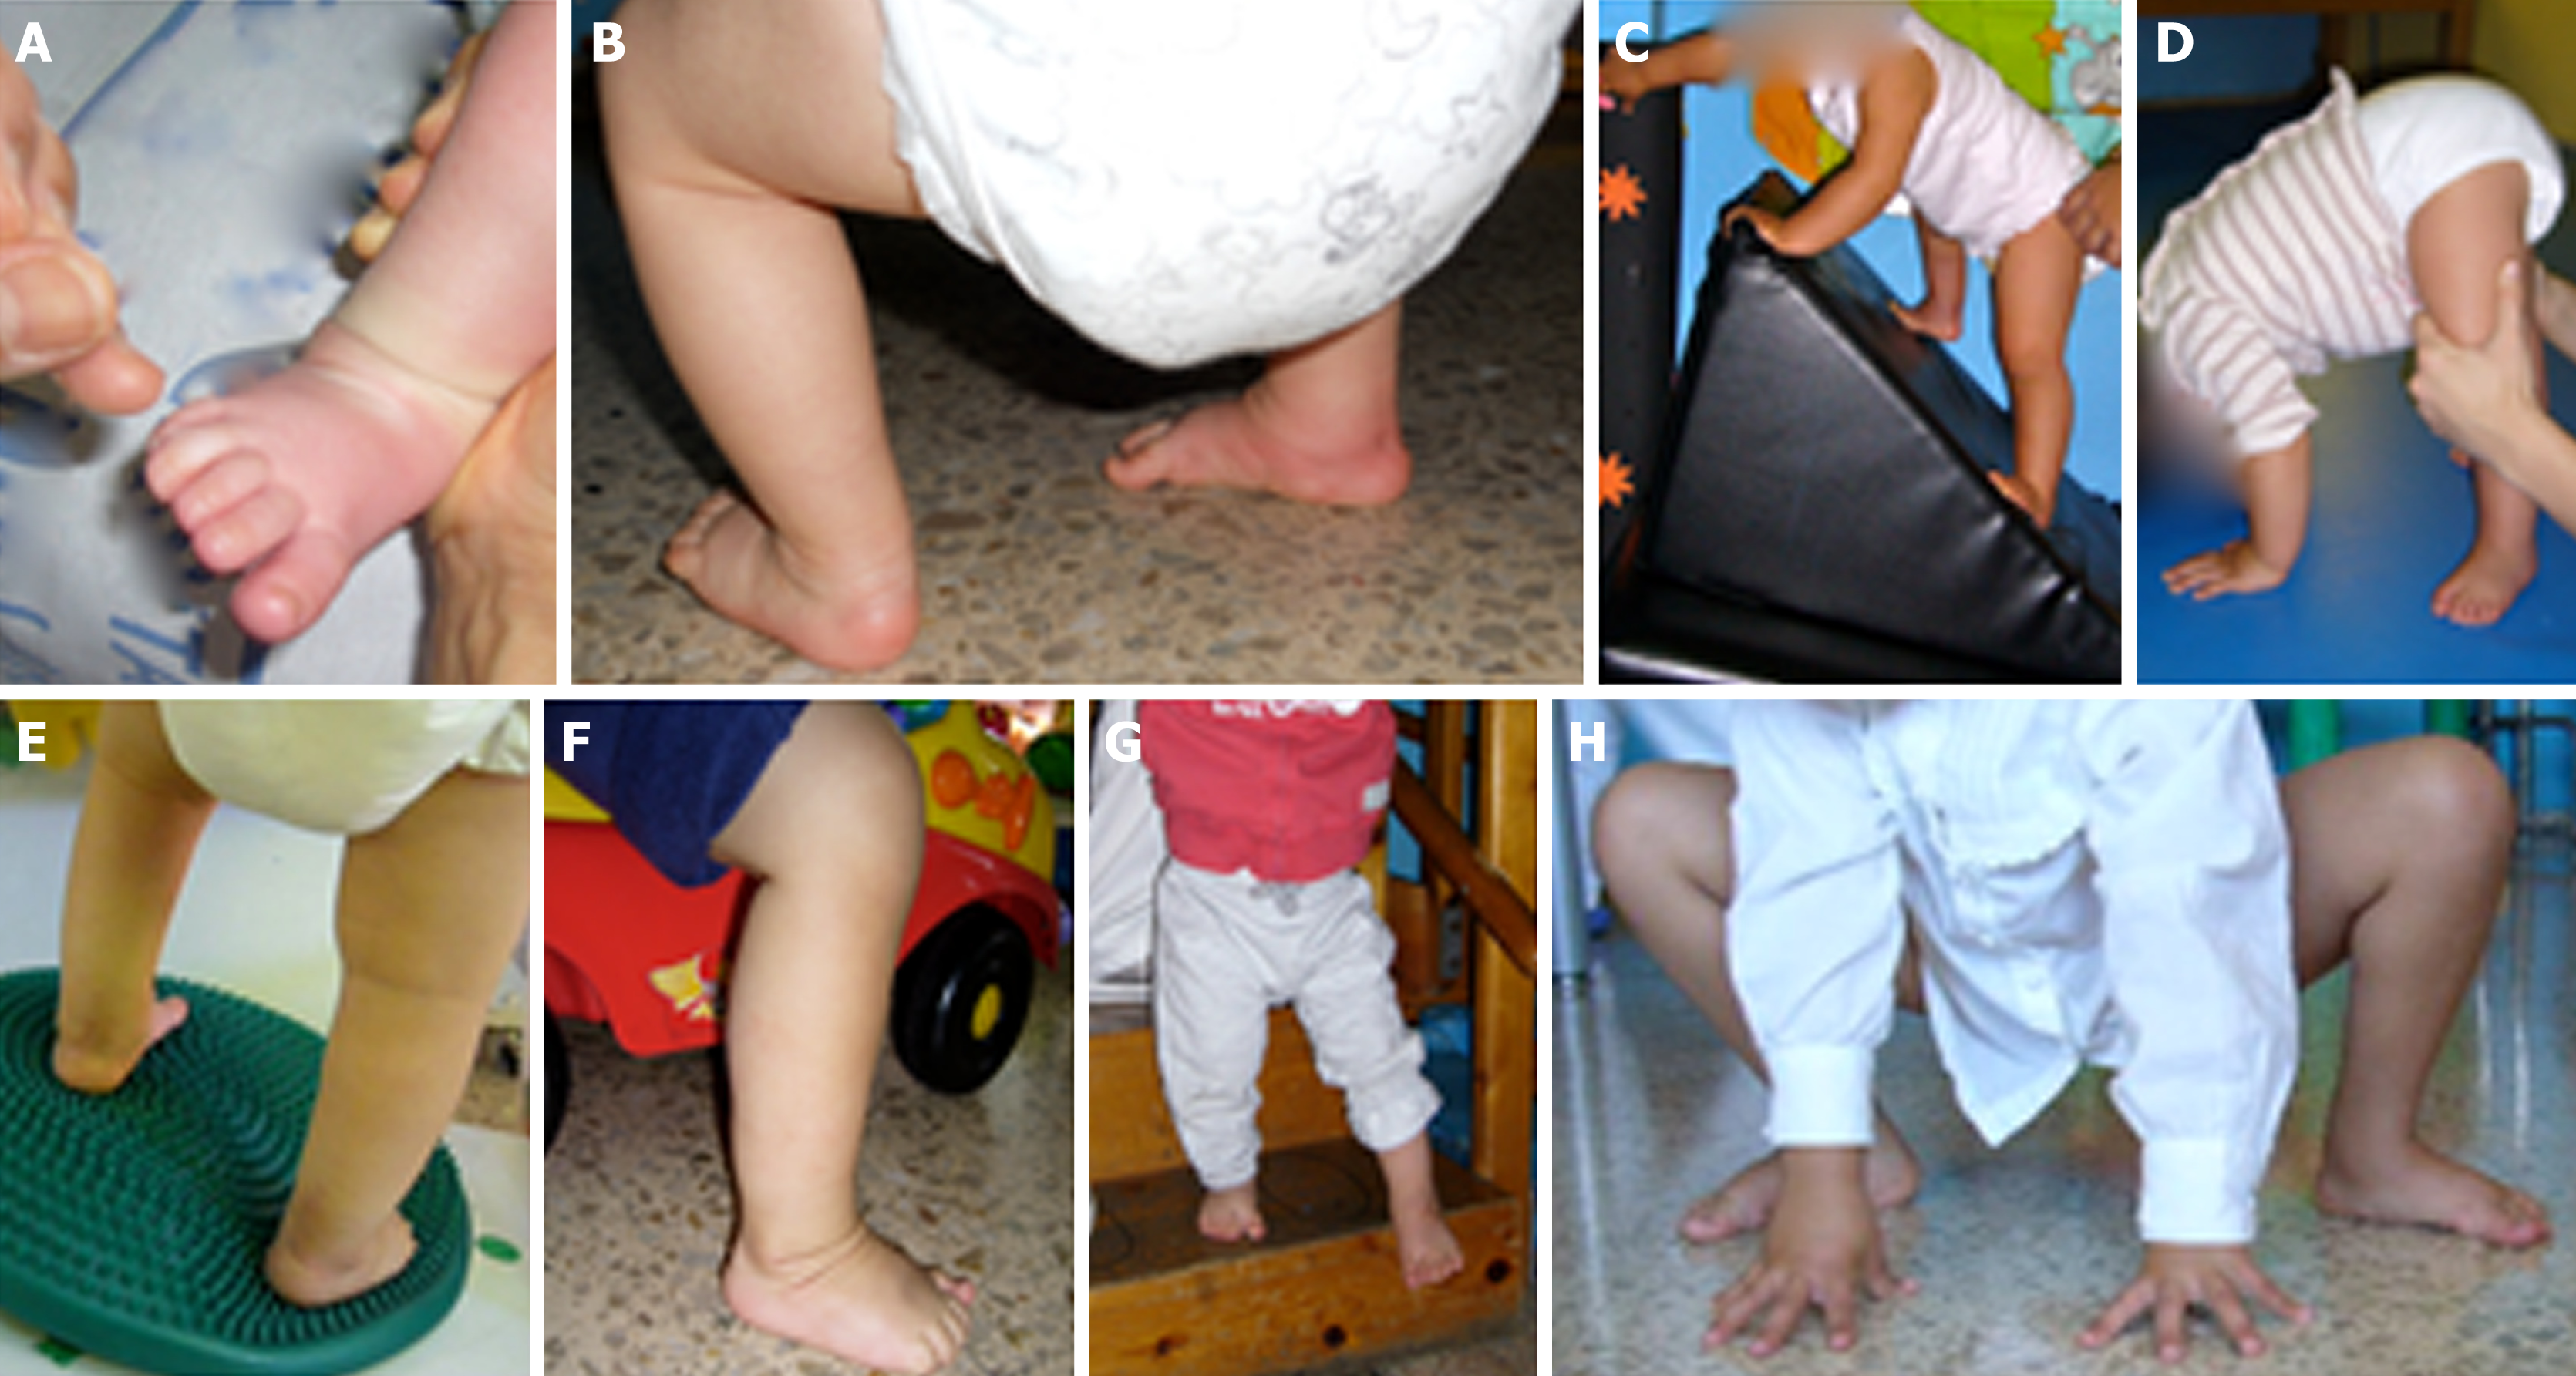 Functional Physiotherapy Method Results For The Treatment Of Idiopathic Clubfoot